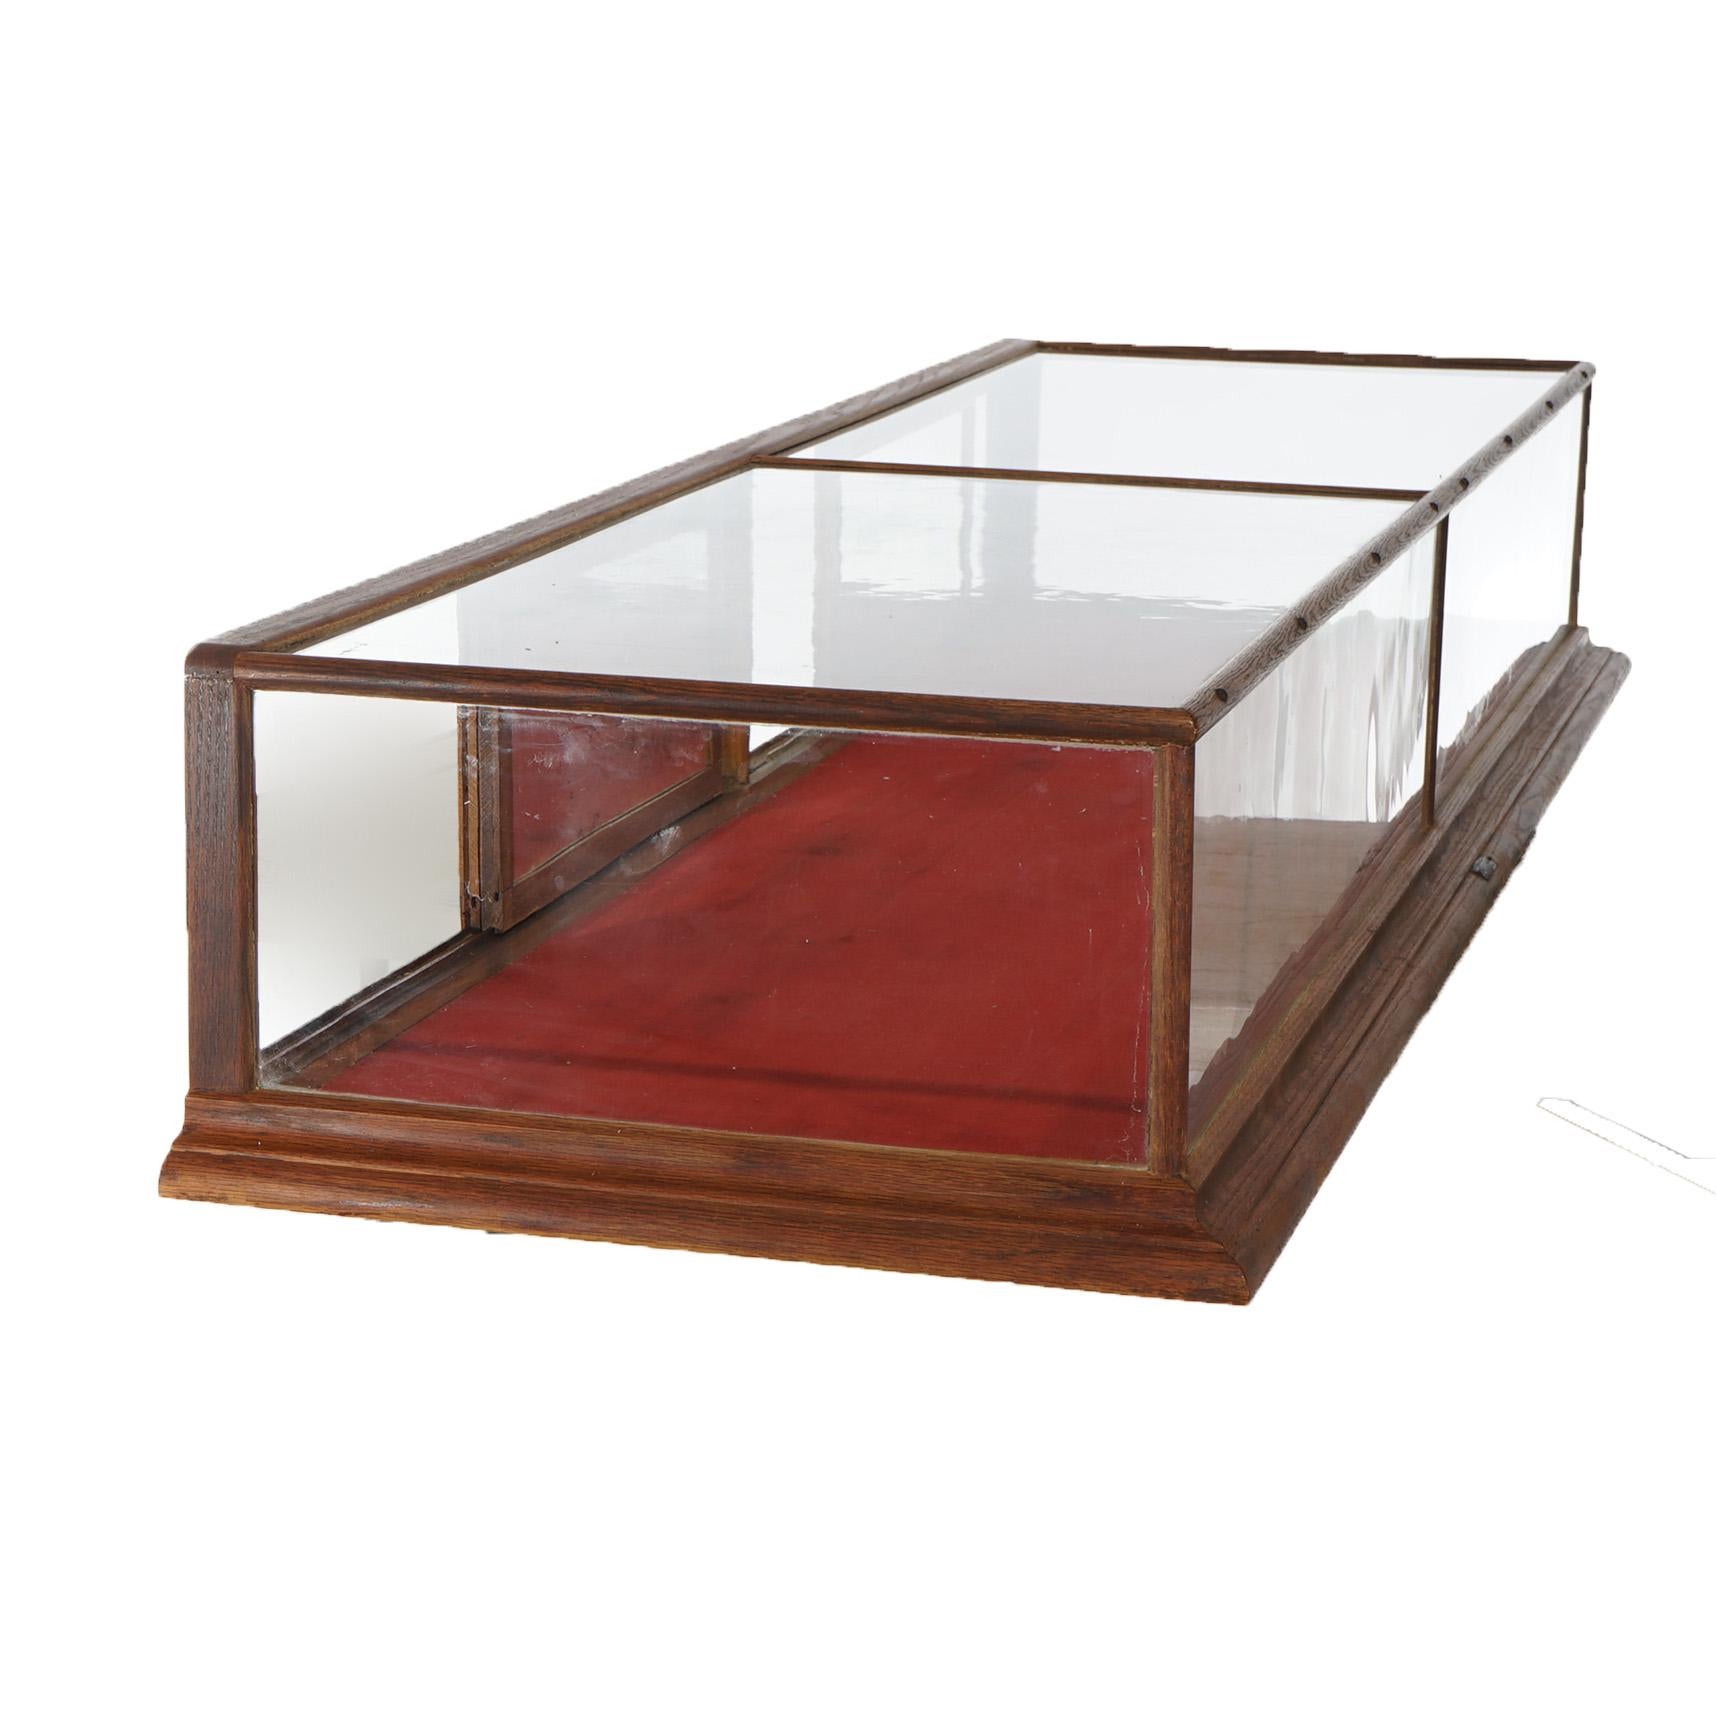 Antique Country Store Buffalo Candy Co. 8’ Oak Table Top Display Case Circa 1900 For Sale 11